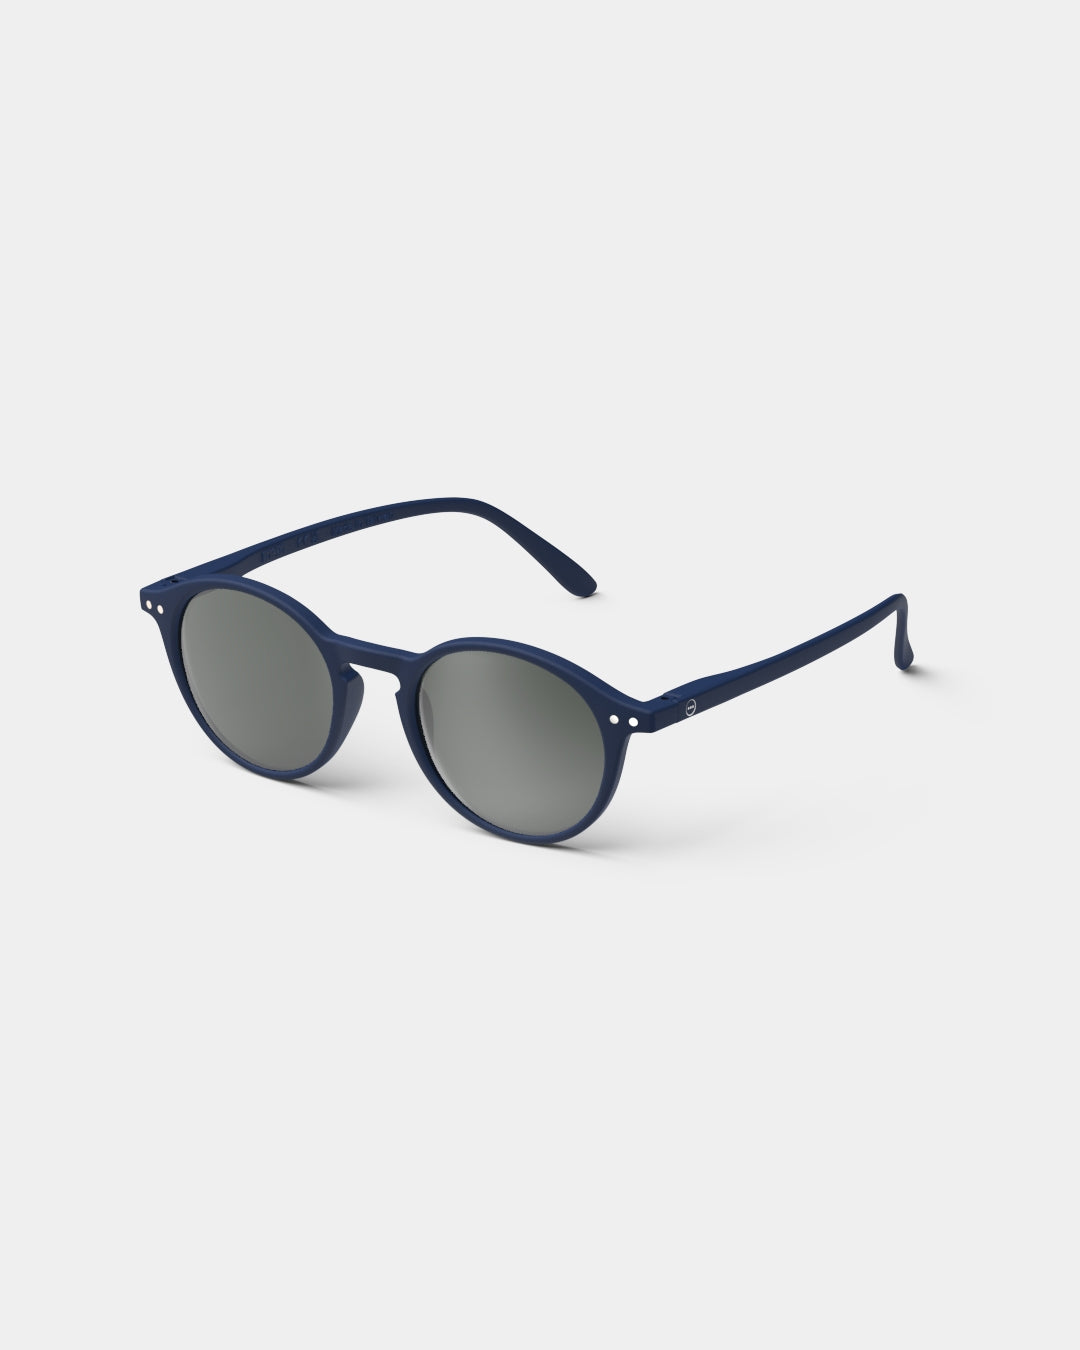 Adult Shape #D The Iconic - Navy Blue - نظارات